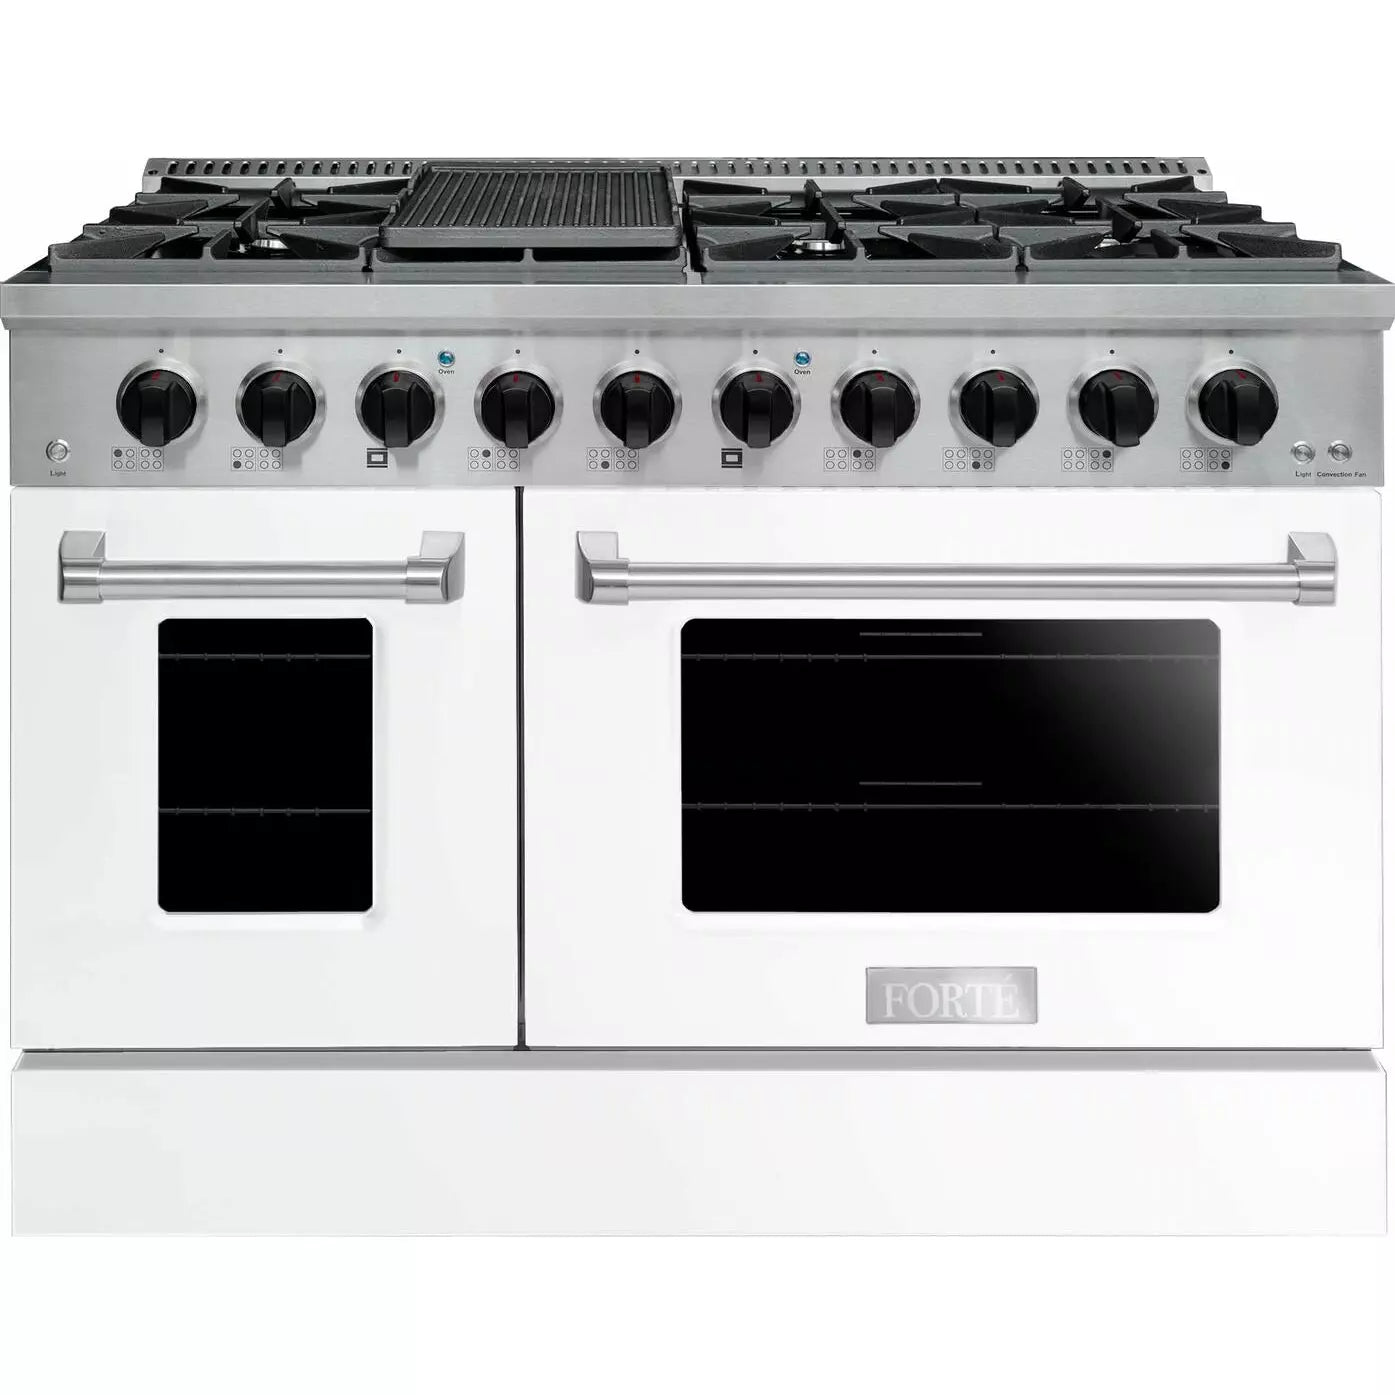 Forte 48" Freestanding All Gas Range - 8 Sealed Italian Made Burners, 5.53 cu. ft. Oven & Griddle - in Stainless Steel With White Door And Black Knob (FGR488BWW2)